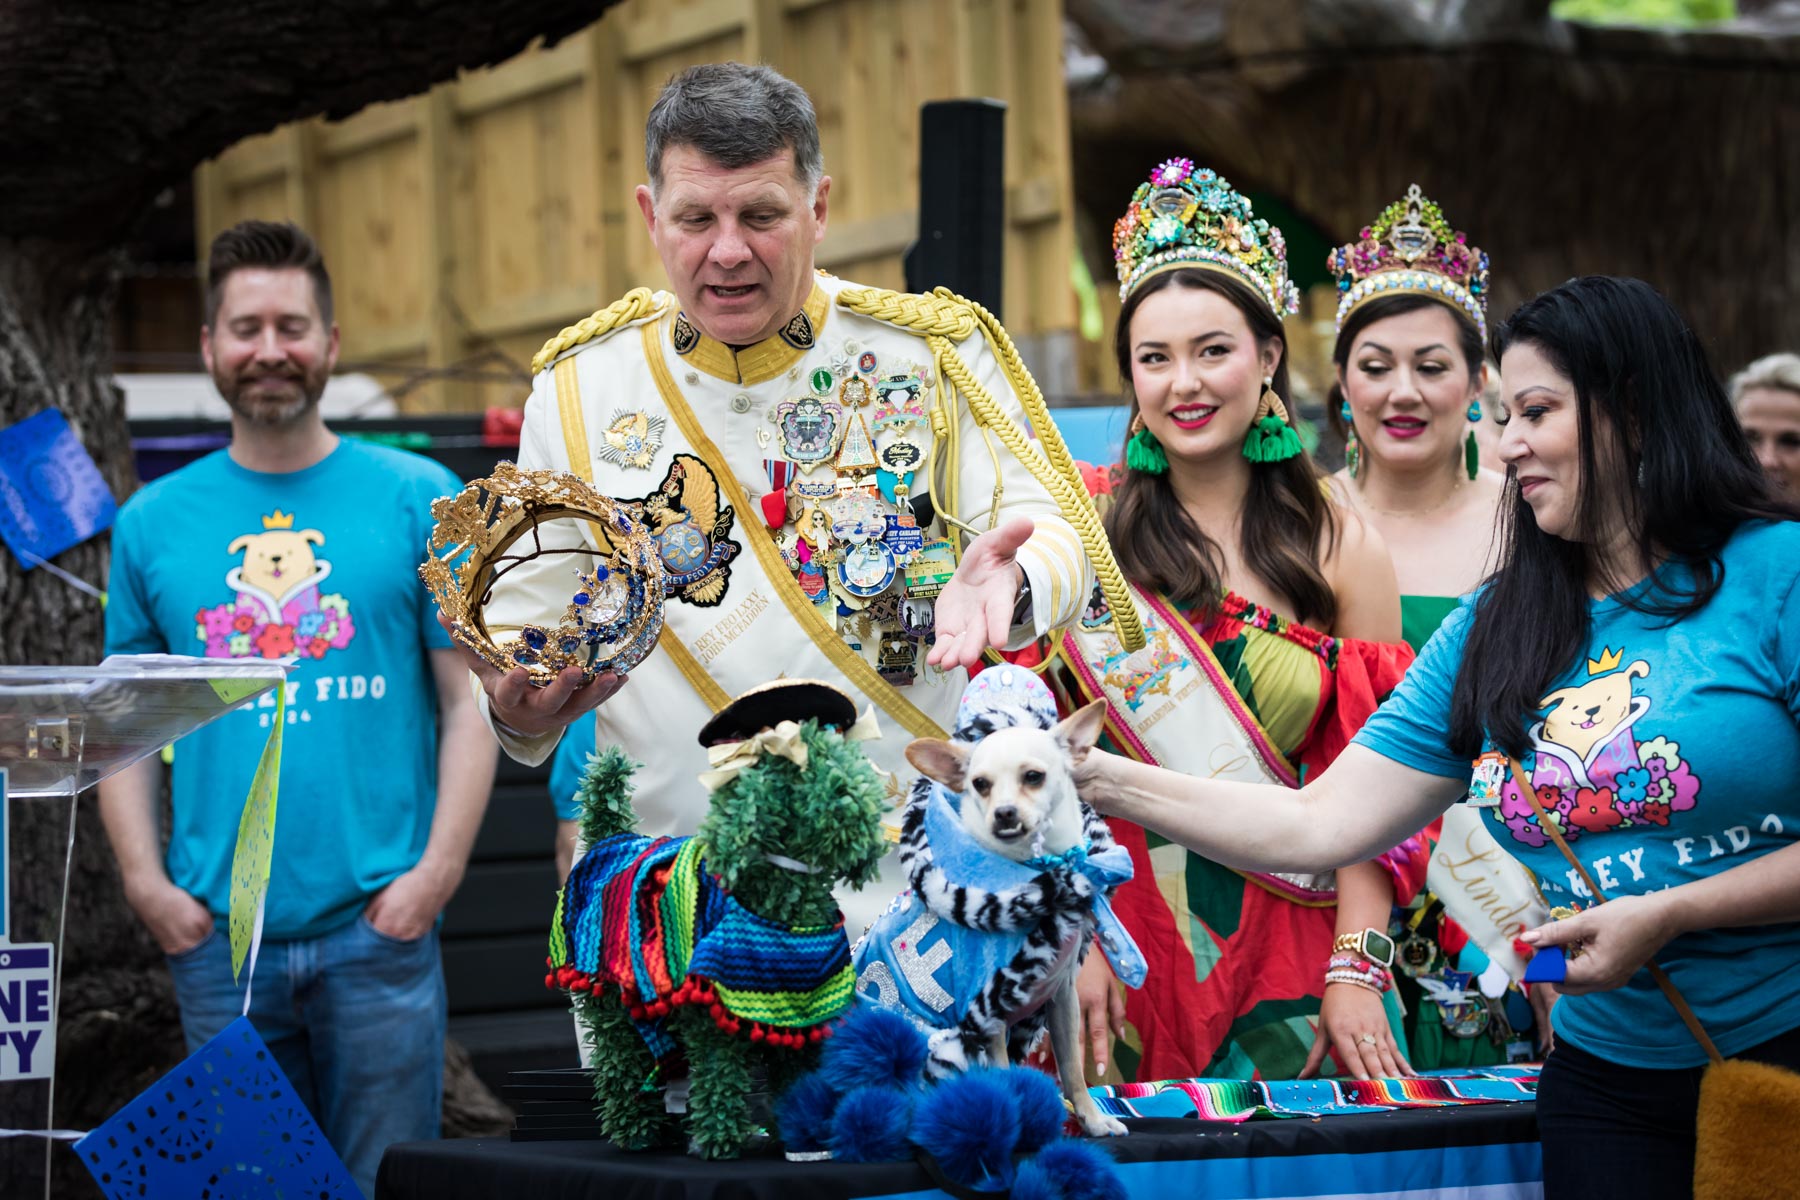 Rey Feo showing crown to female members of court and dog during Rey Fido event for an article on the best Fiesta photos